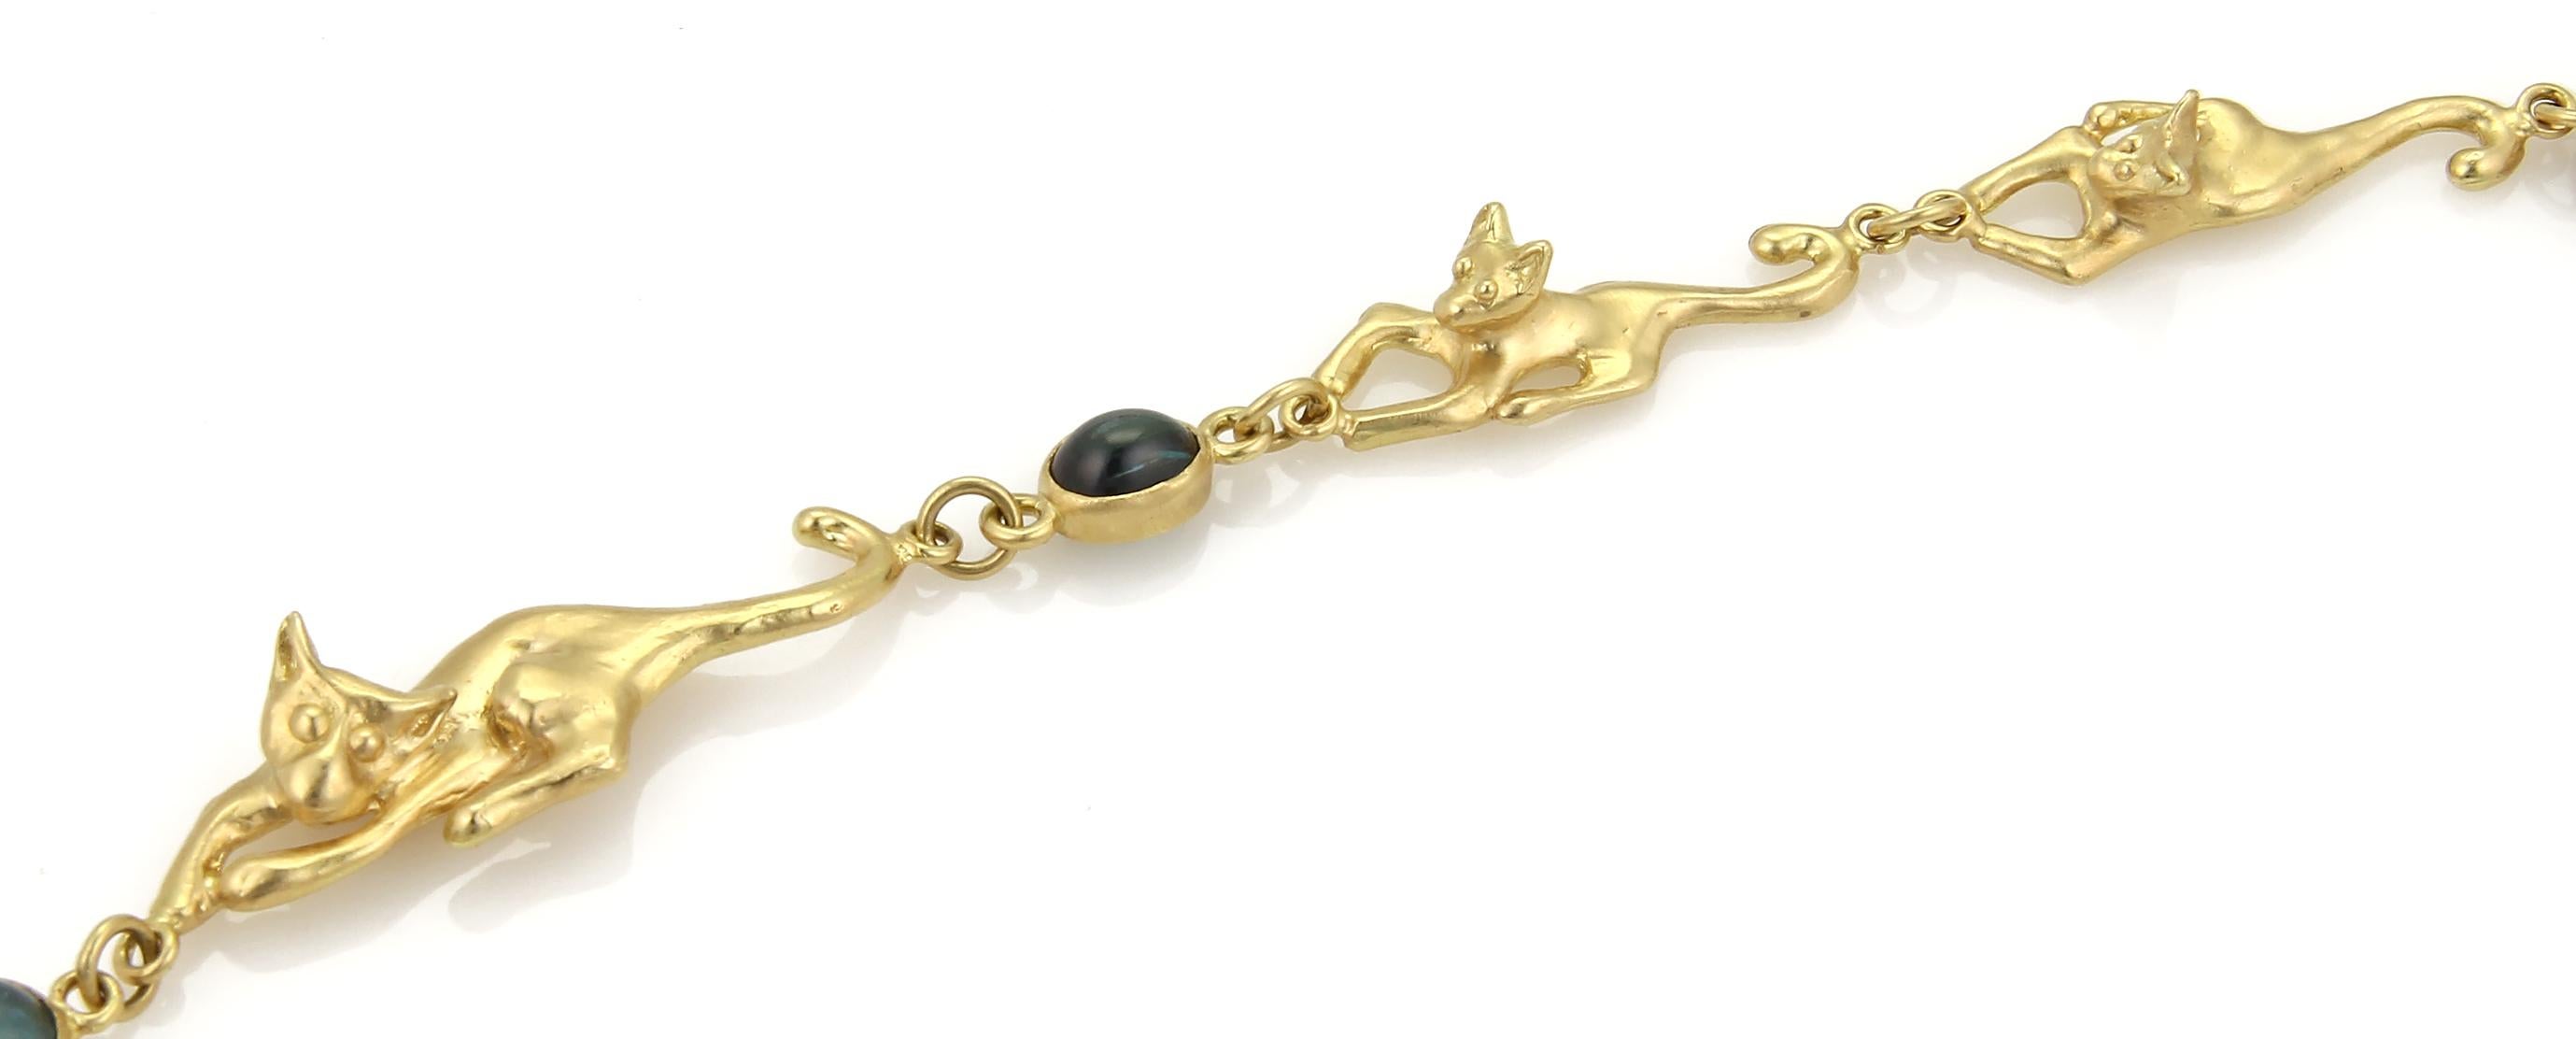 Contemporary Peter Aylen One of a Kind Indicolite Tourmaline 18k Gold Cats Necklace 155gr. For Sale